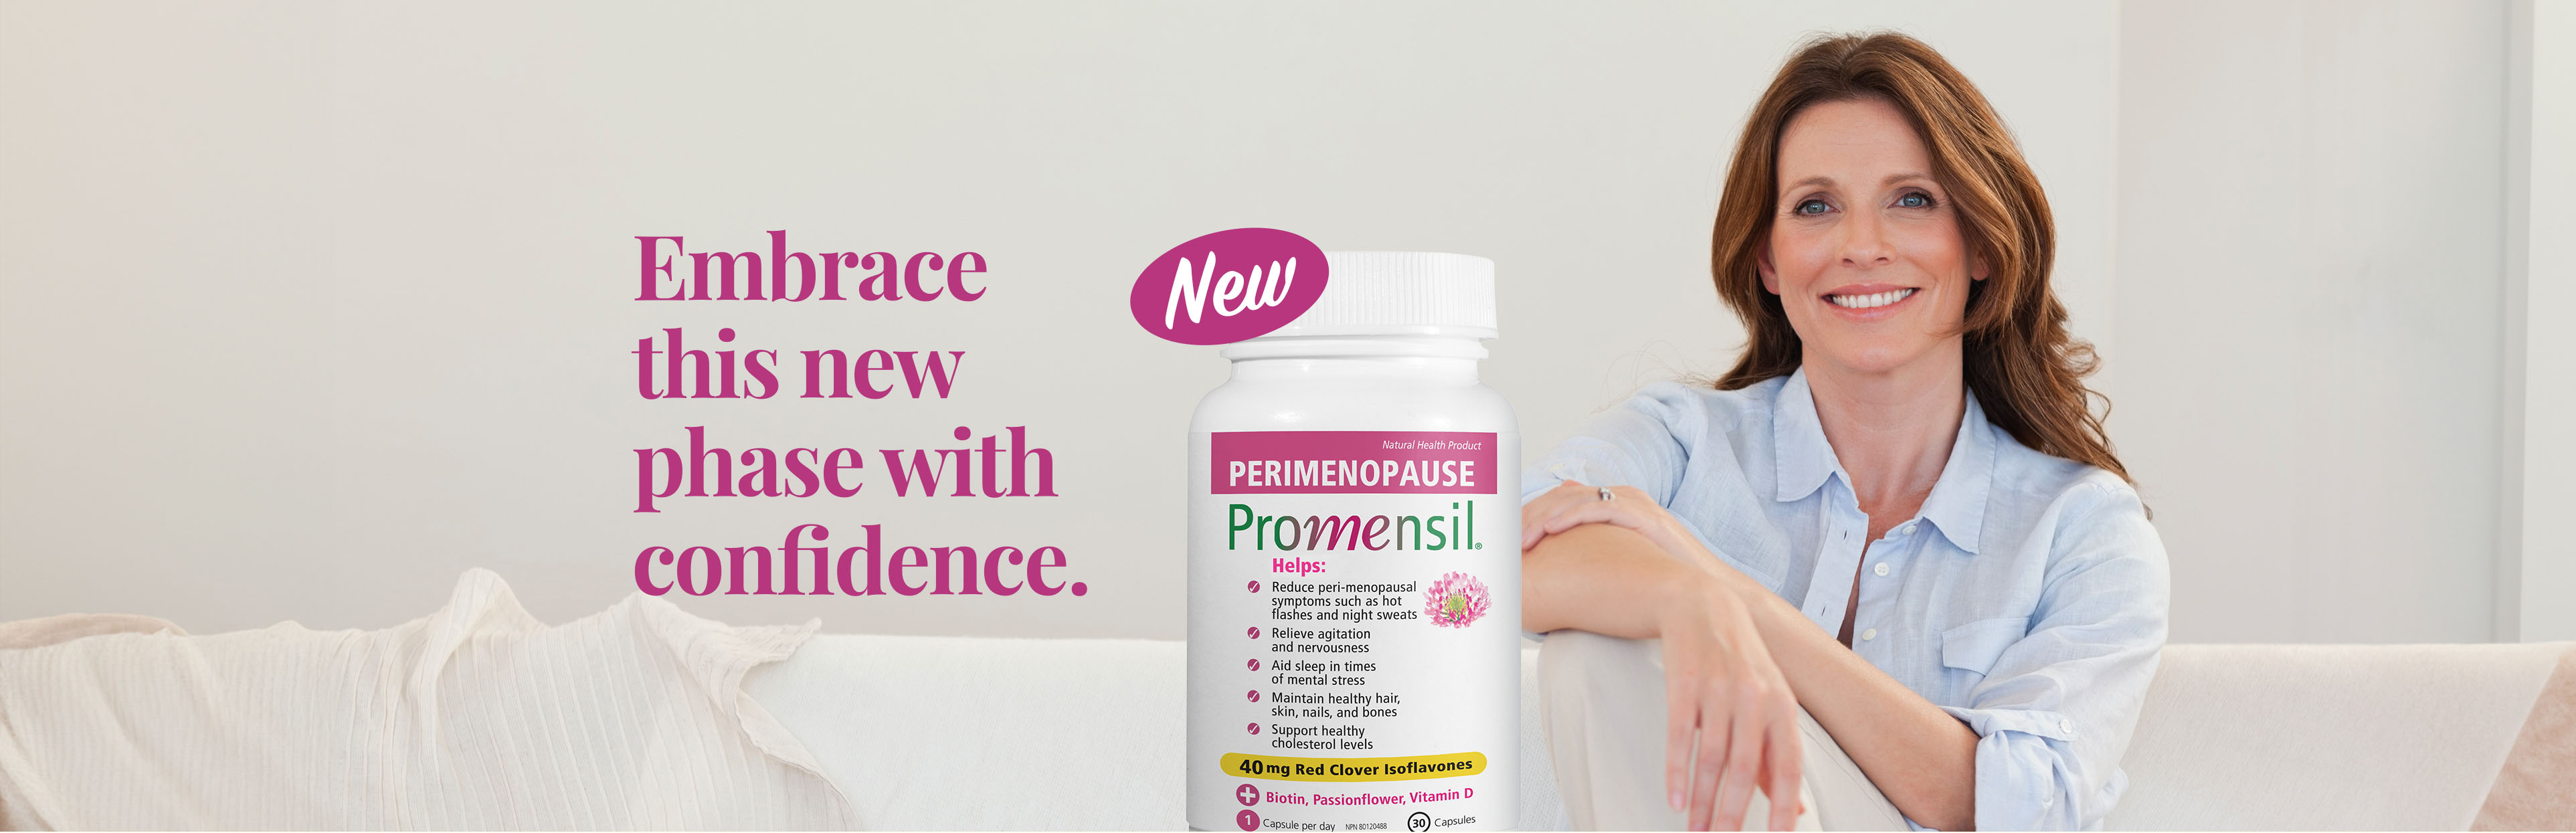 NEW. Promensil Perimenopause. Embrace this new phase with confidence.